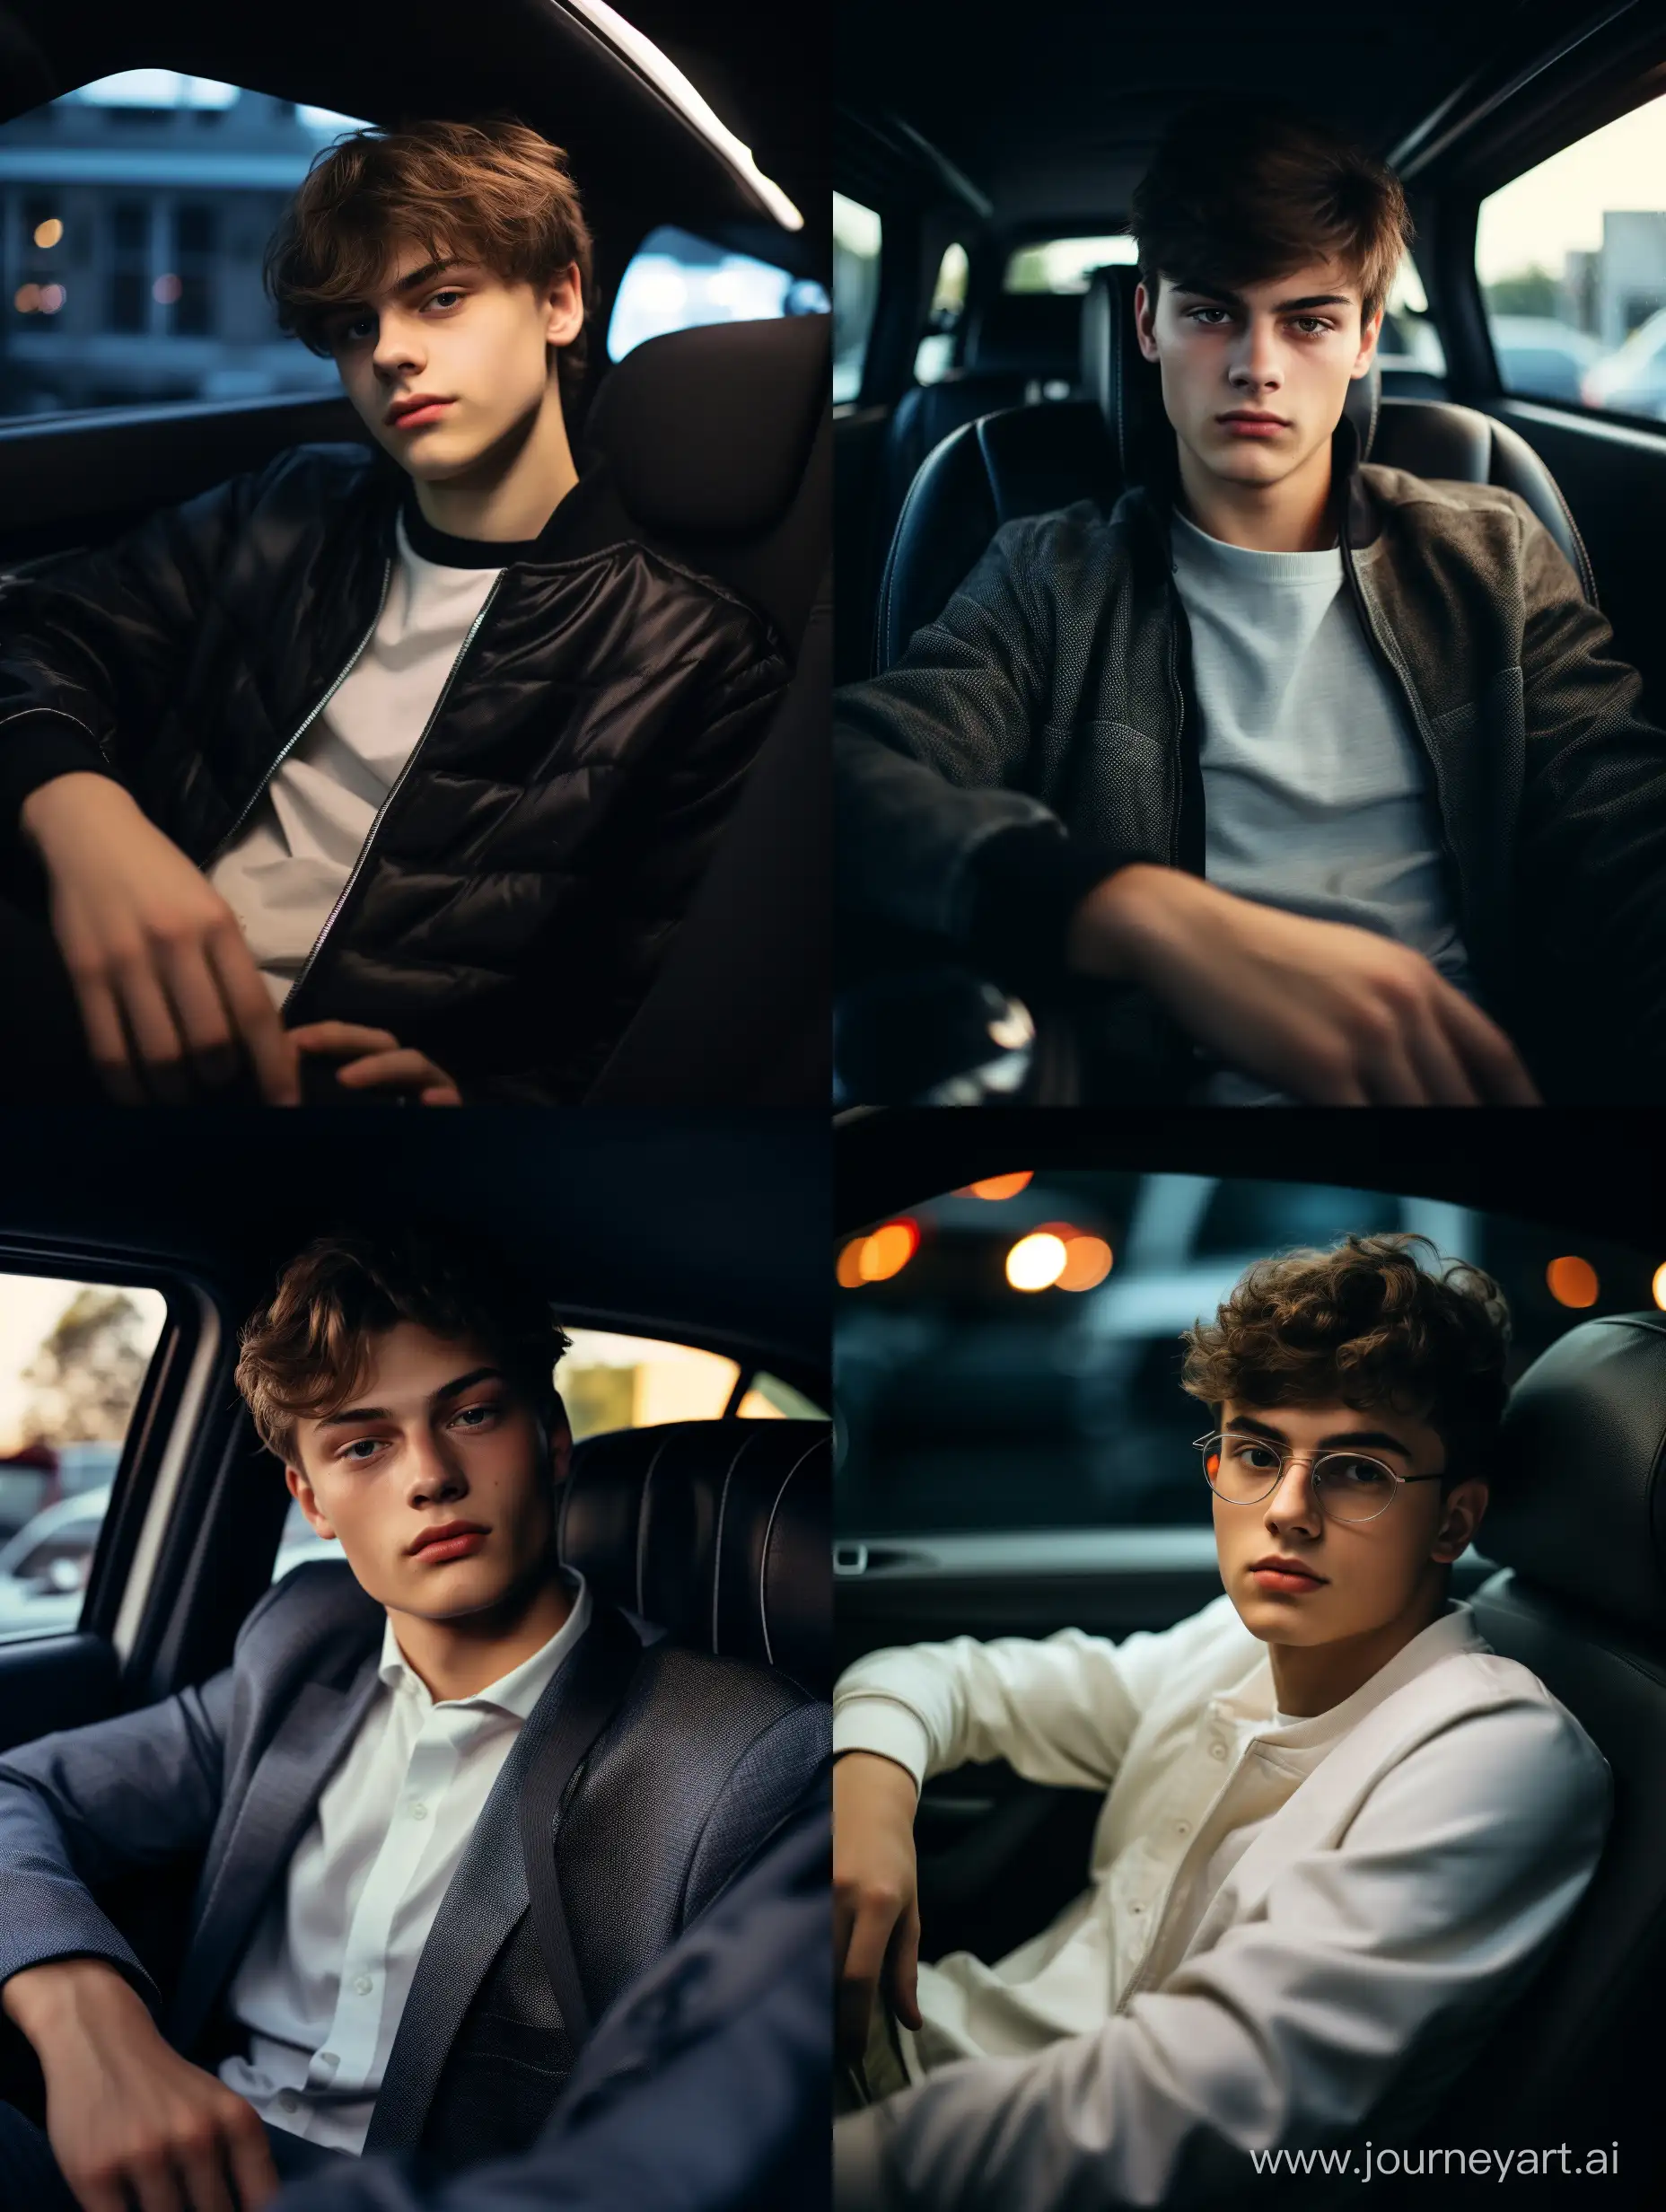 A sophisticated, realistic 4k cinematic photo, teenager, Not a mature 16 years old. European appearance with classical darkbrown medium length Fringe haircut. He's wearing brand-new casual clothes. He is sitting in back seat of Mercedes maybach car, long exposure, close-up portrait In the style of 35mm film